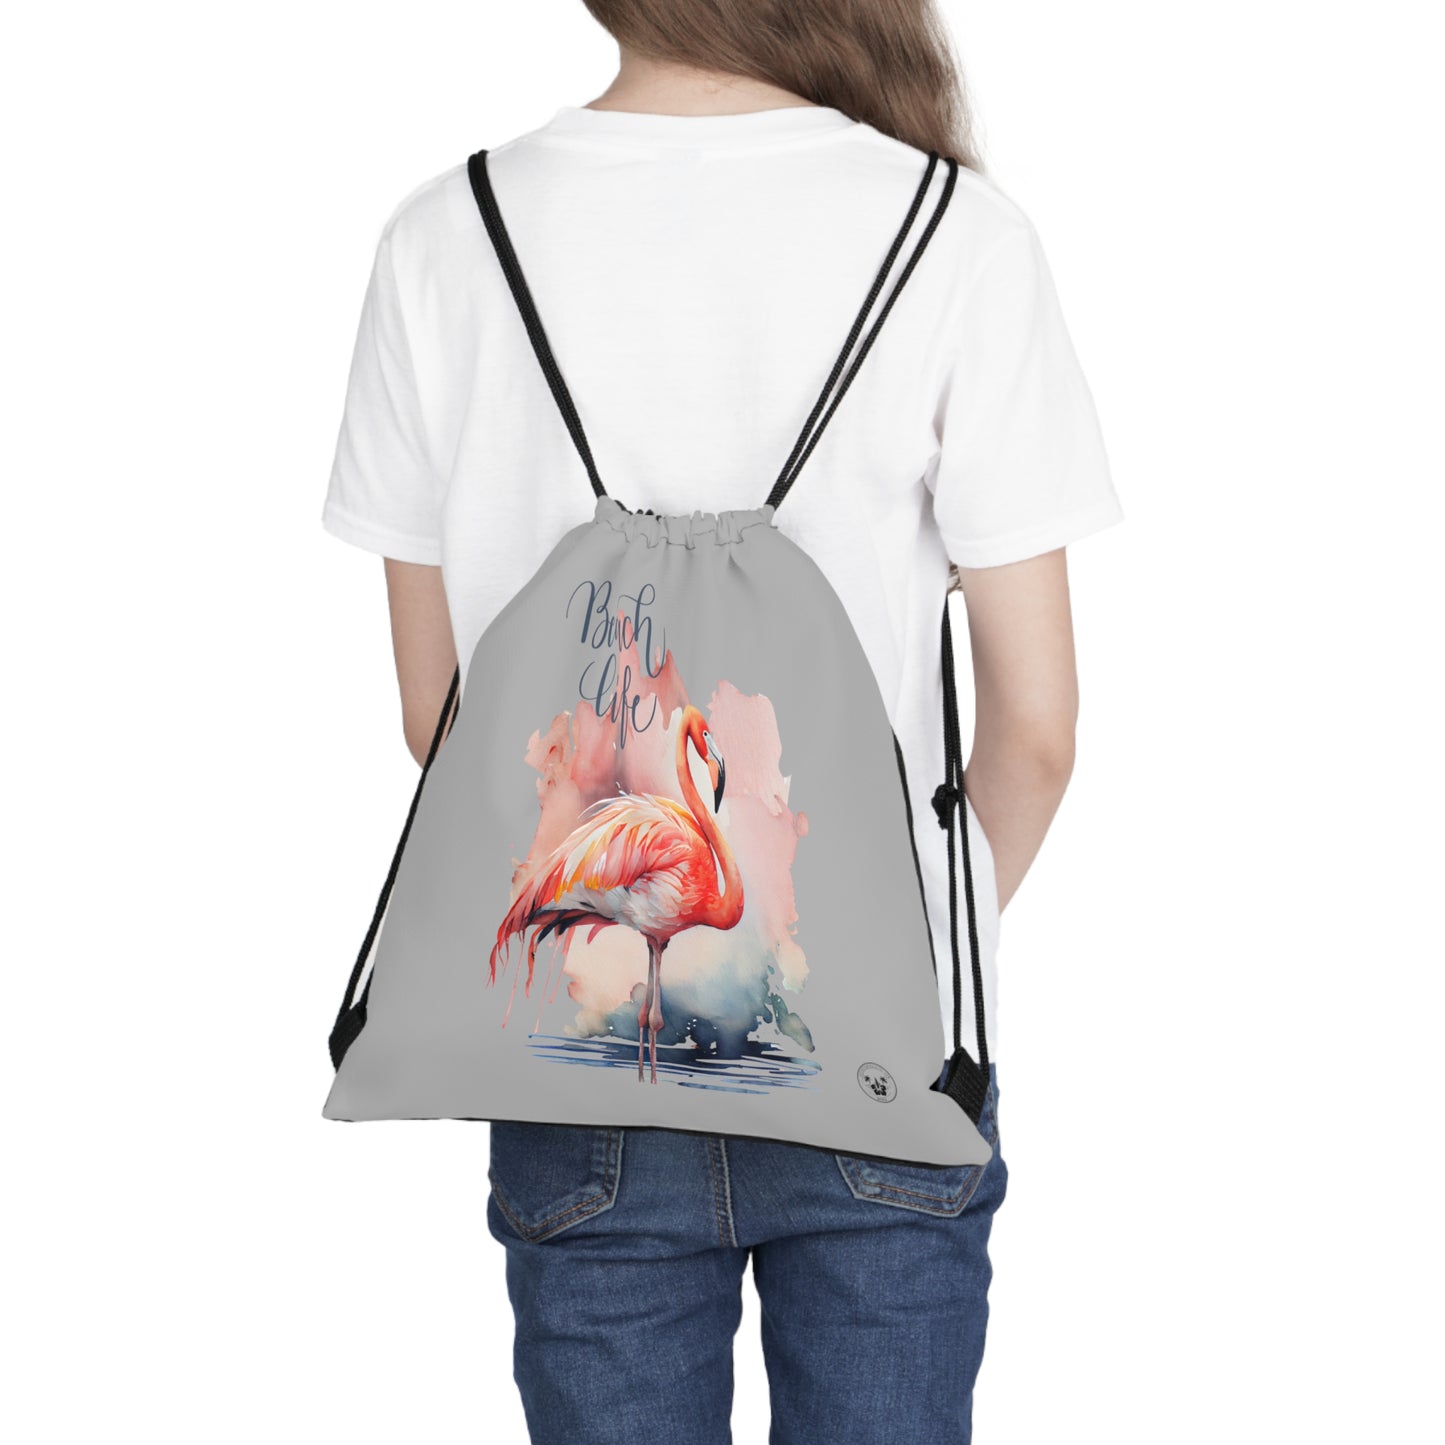 Unleash your wanderlust with our versatile drawstring backpack! Embrace travel with ease and style, flaunting a Beach Life Flamingo graphic with bright color backgrounds. This one is a grey background. Designed for adventurers, it's the perfect blend of practicality and fashion. Get yours today for your next adventure! This is a front view of the backpack on the back of a model.